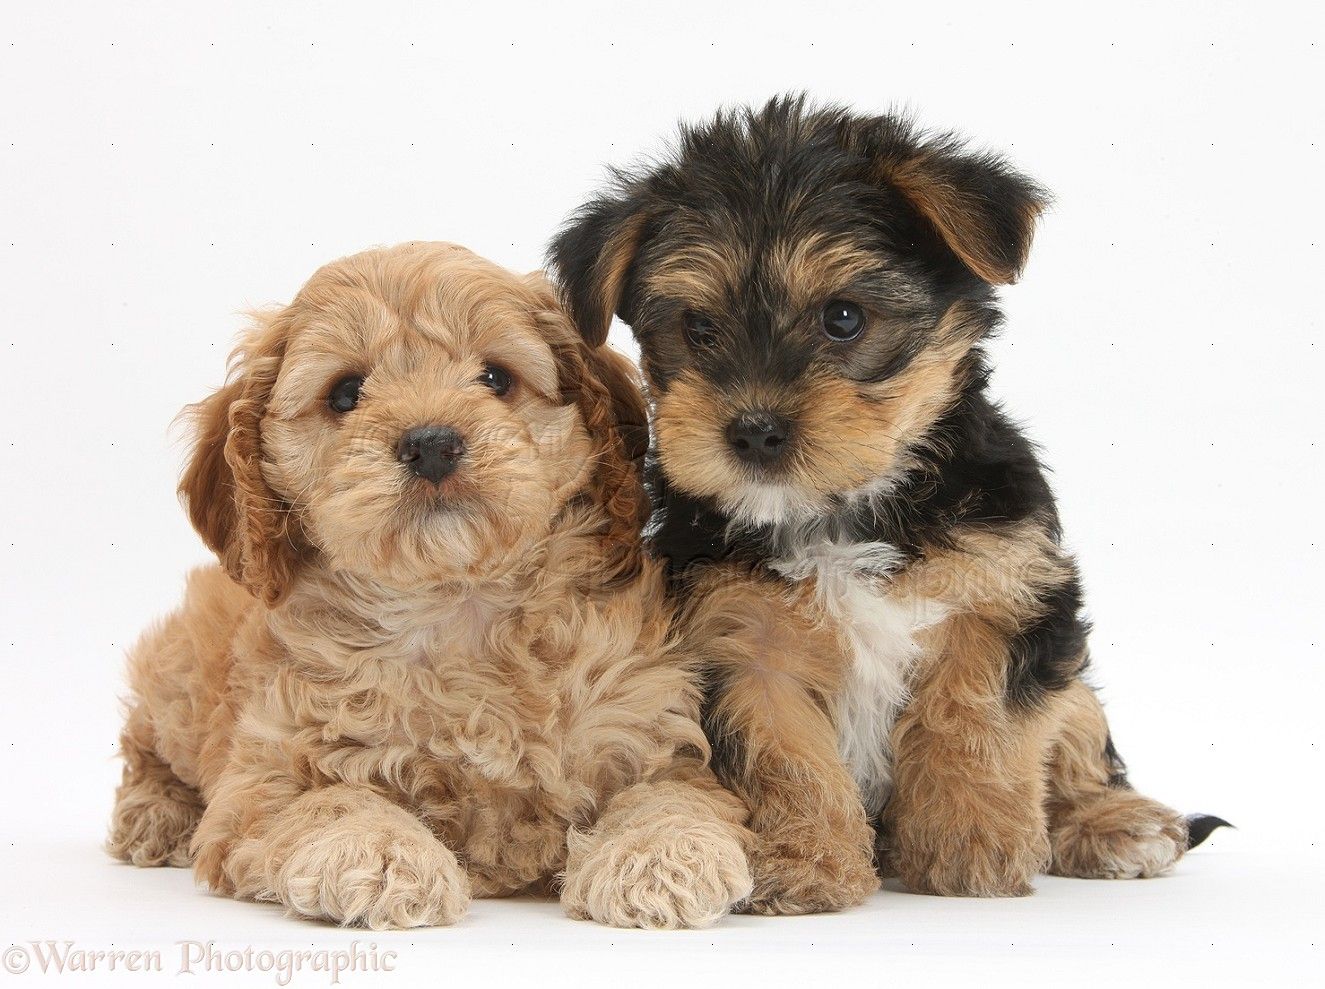 Dogs: Cavapoo pup and Yorkie pup photo WP28944